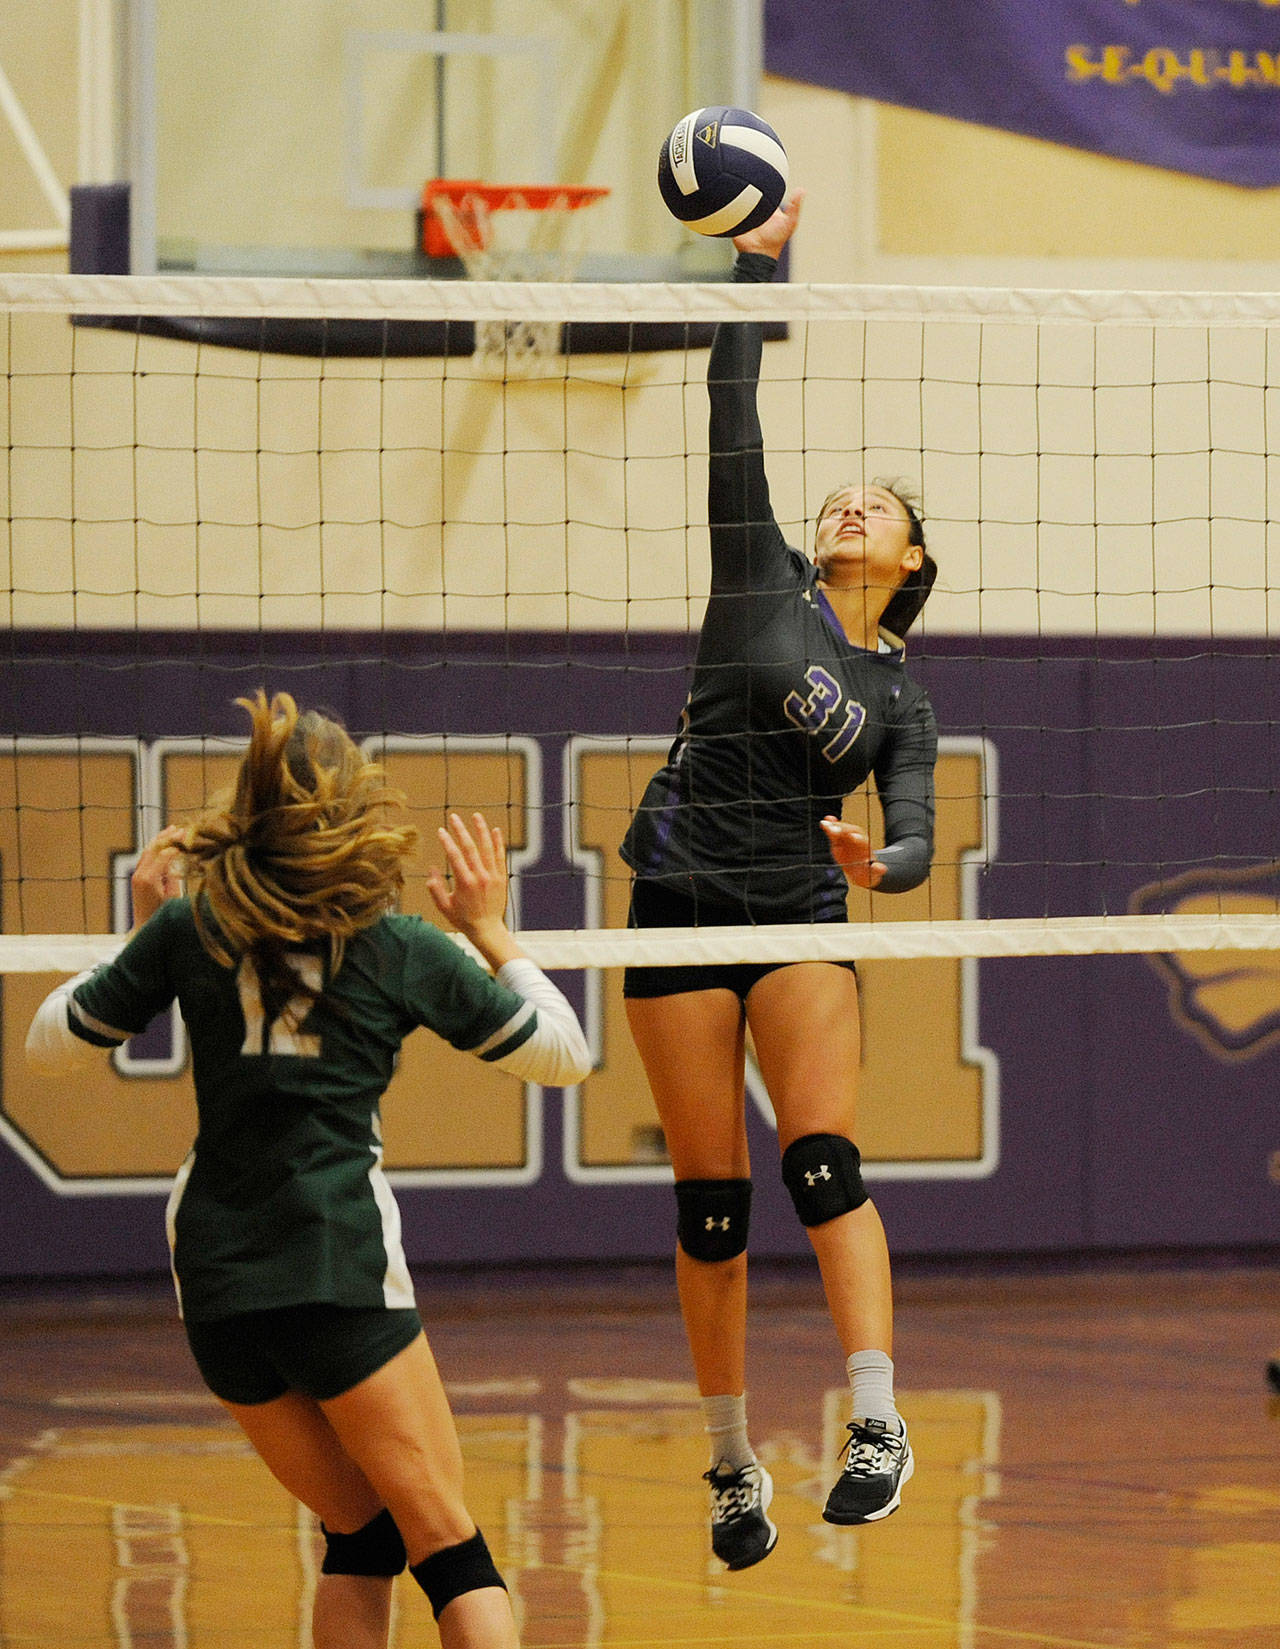 Kiana Robideau of Sequim, right, looks for a point as Port Angeles’ Zoe Smithson defends. Sequim Gazette photo by Michael Dashiell